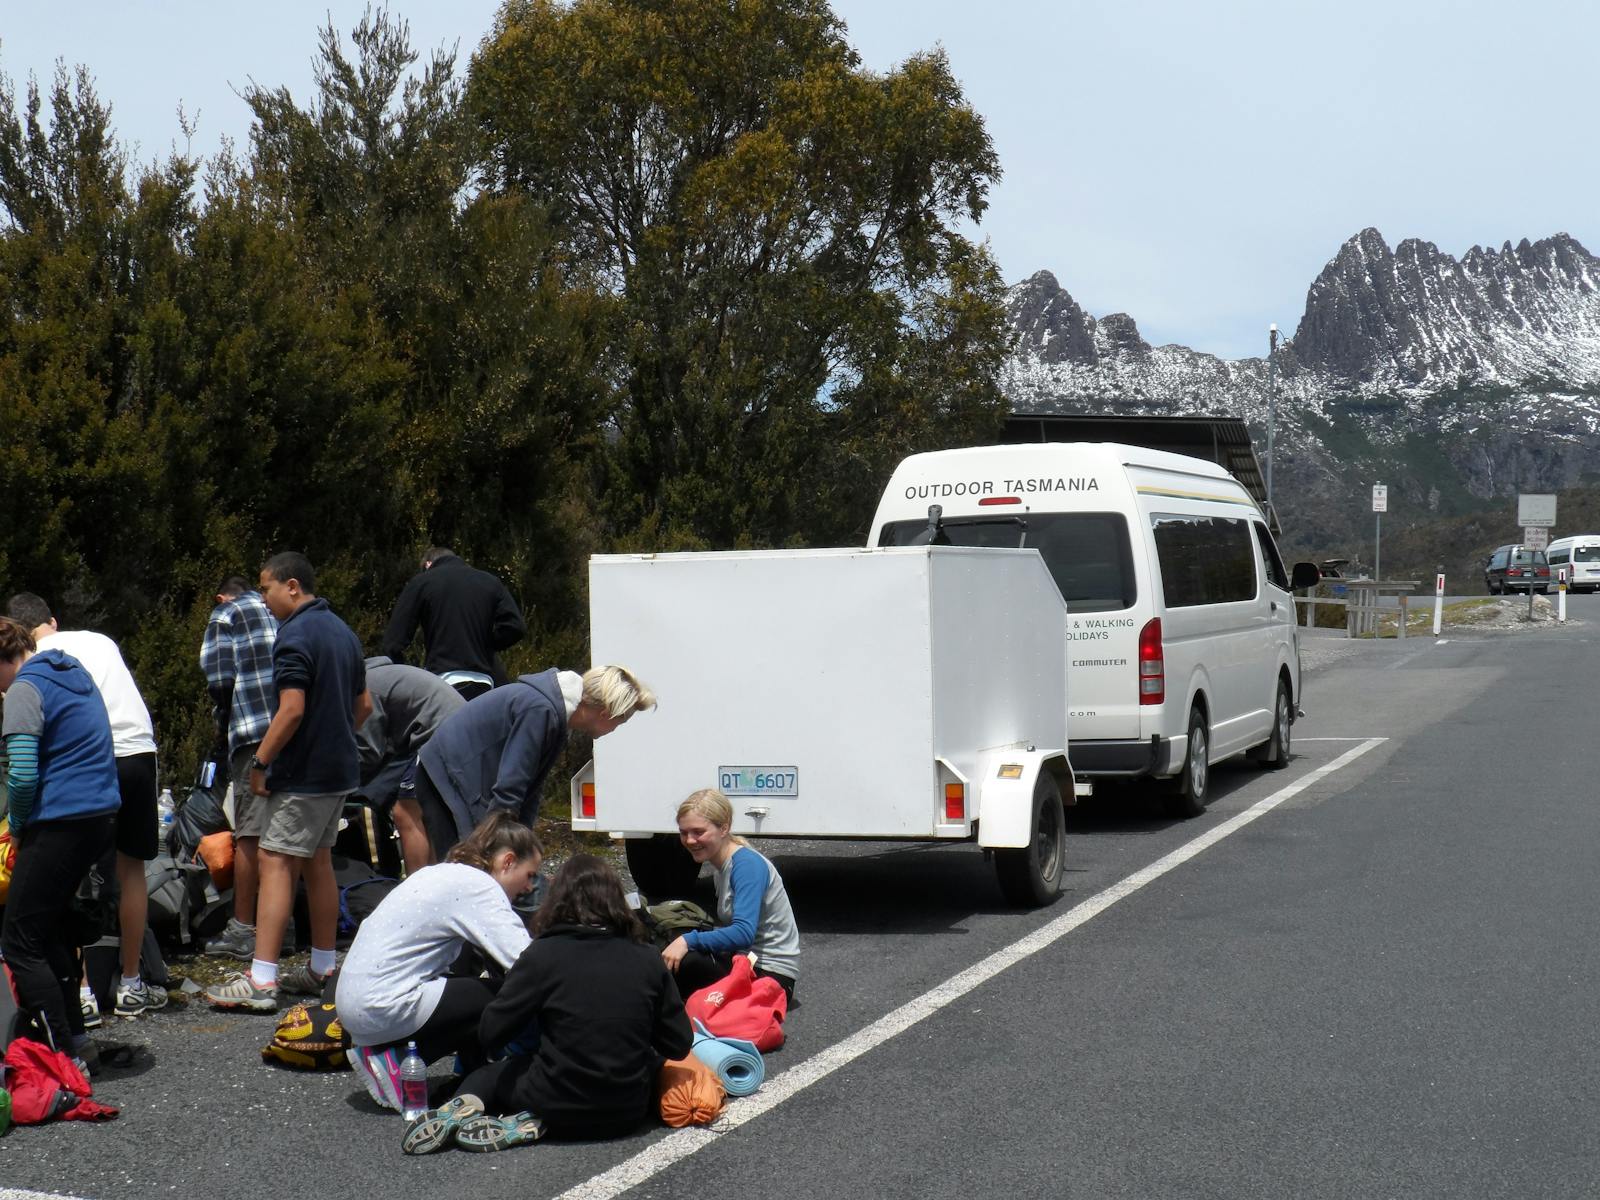 A school group prepairing to set out on the Overland Track Walk, our bus in background